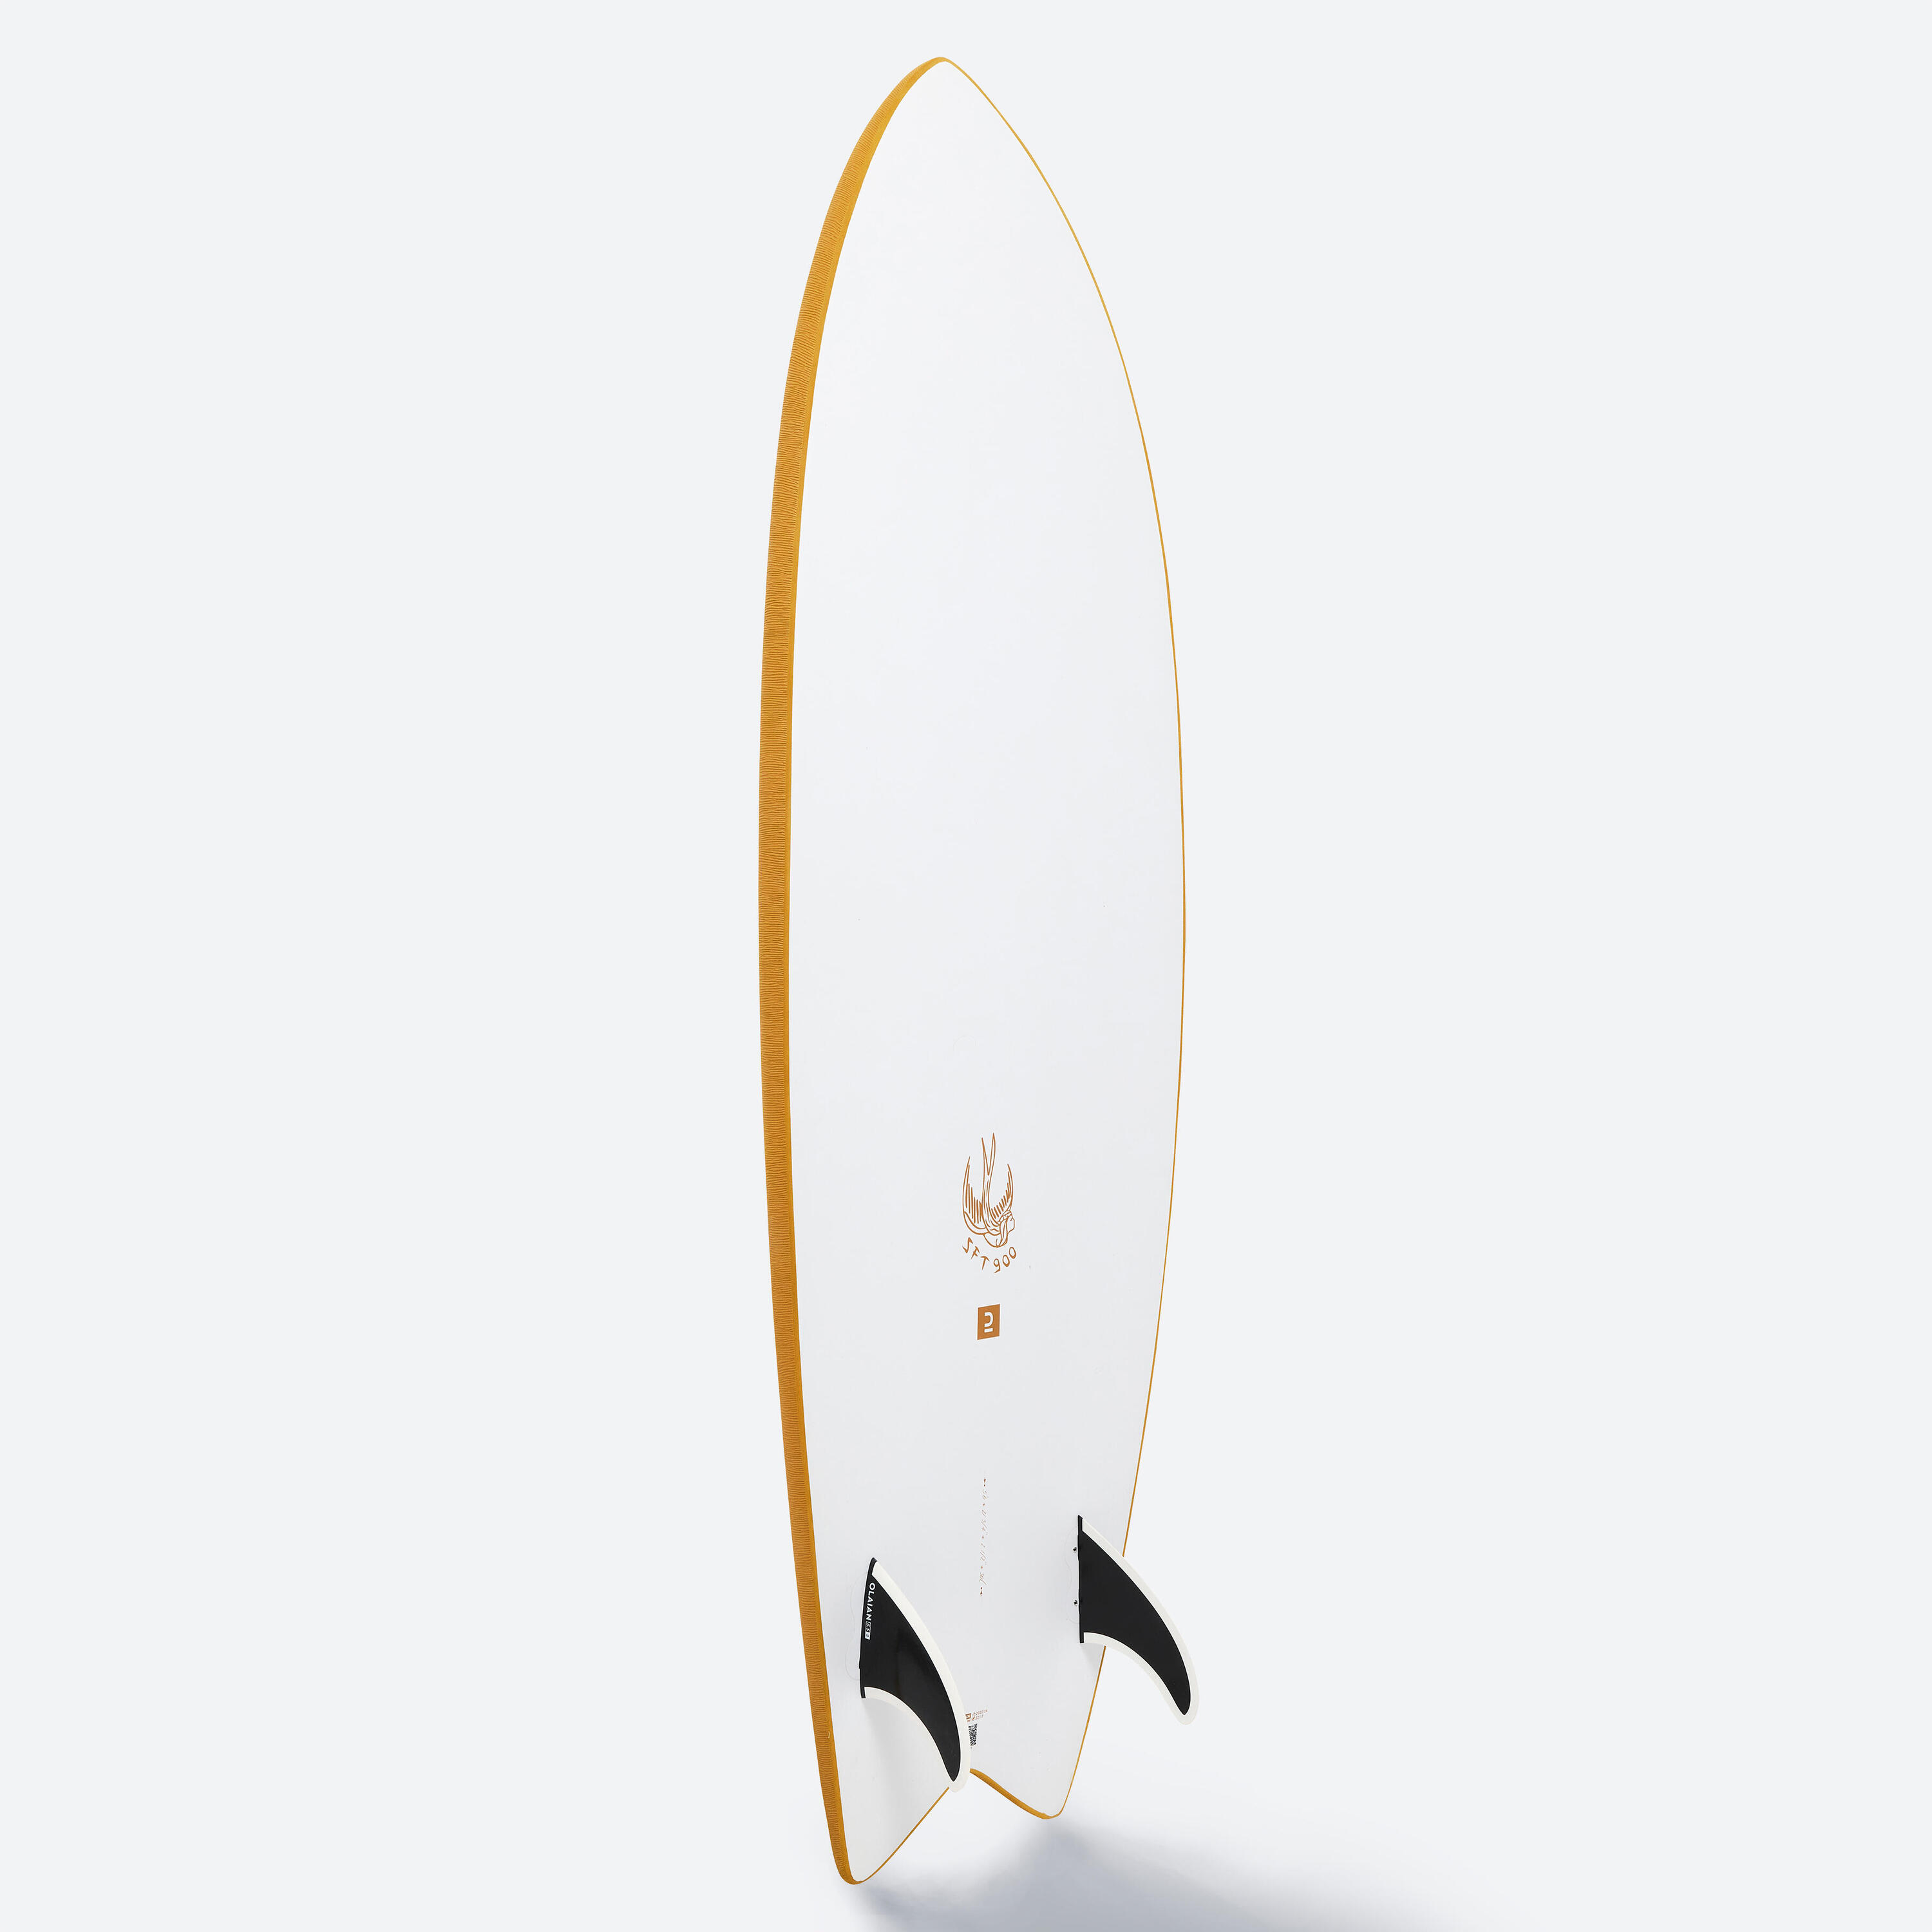 SURFBOARD 900 EPOXY SOFT 5'6 - Supplied with 2 fins 12/13